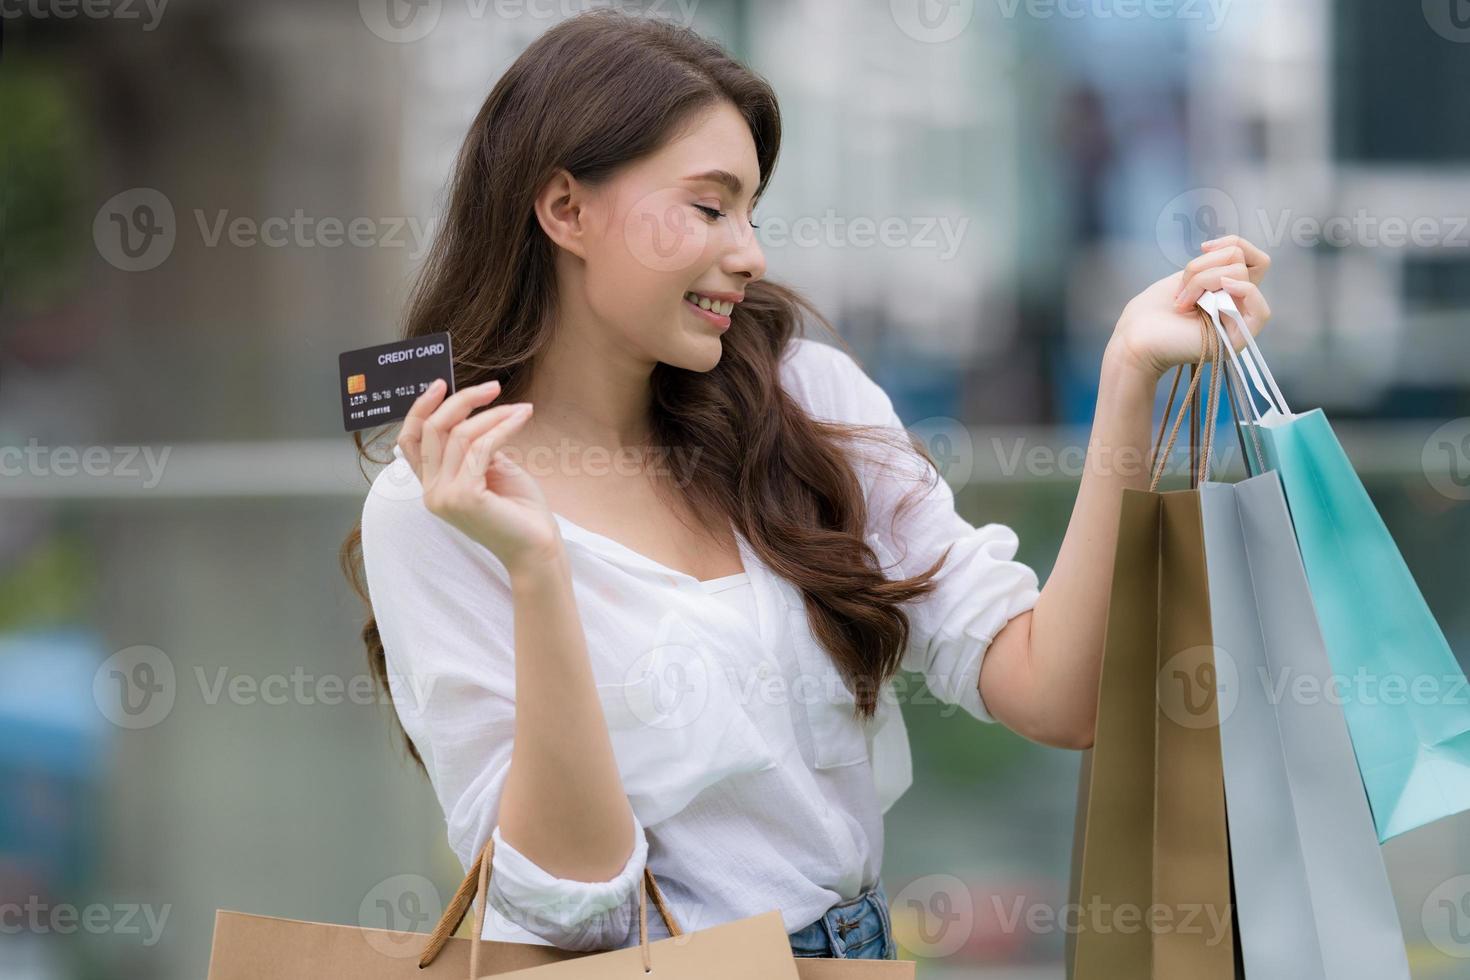 Outdoors portrait of Happy woman holding shopping bags and smiling face photo